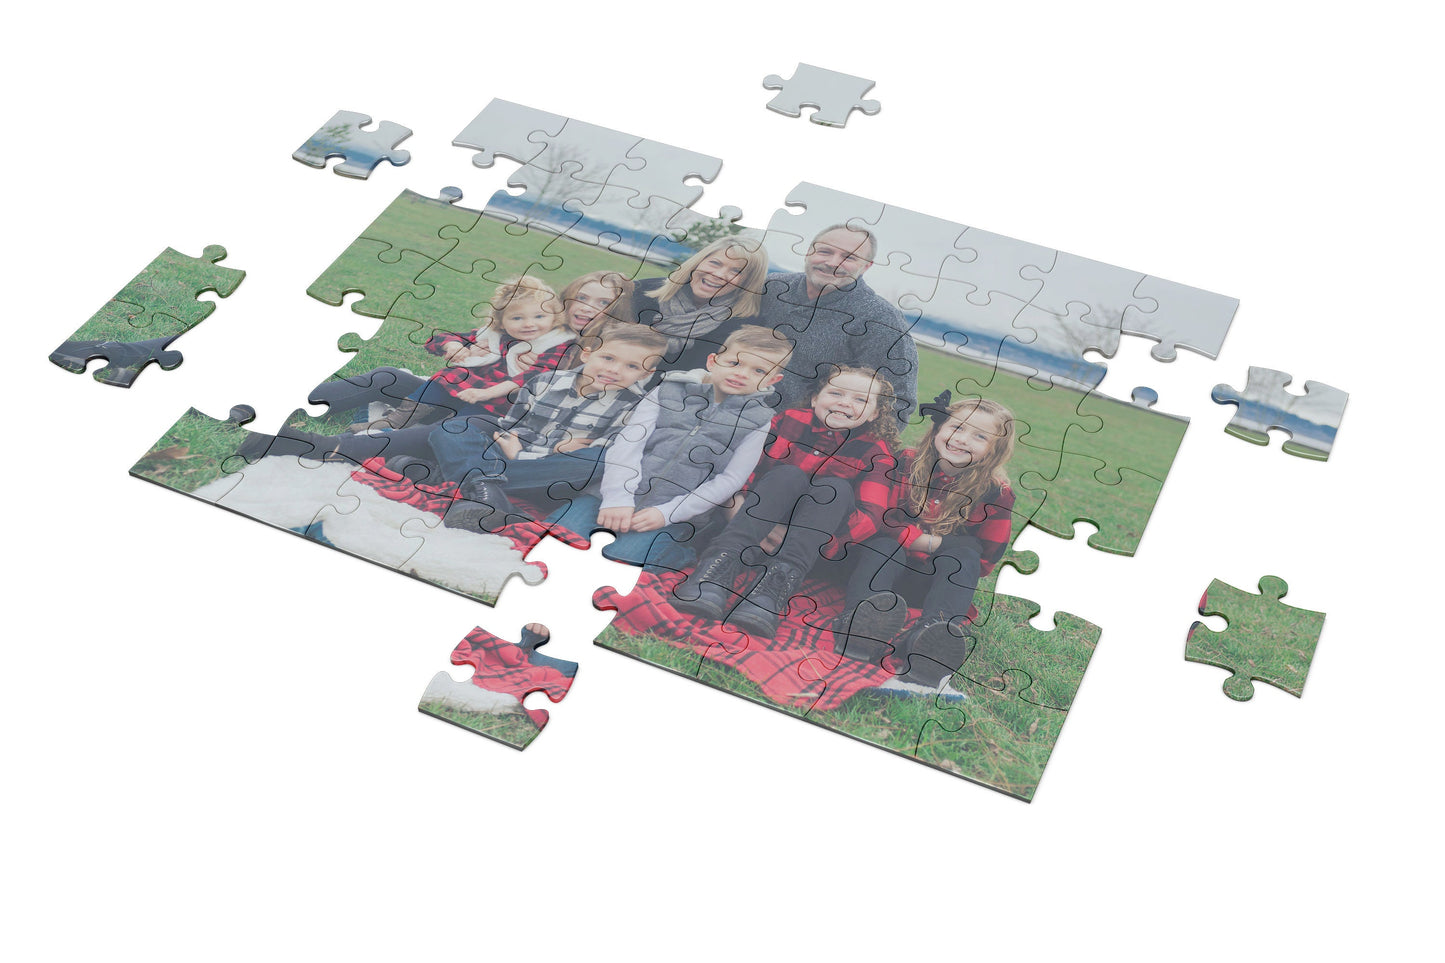 Custom Puzzle Family Gift Ideas, Personalized Gift Jigsaw Puzzle